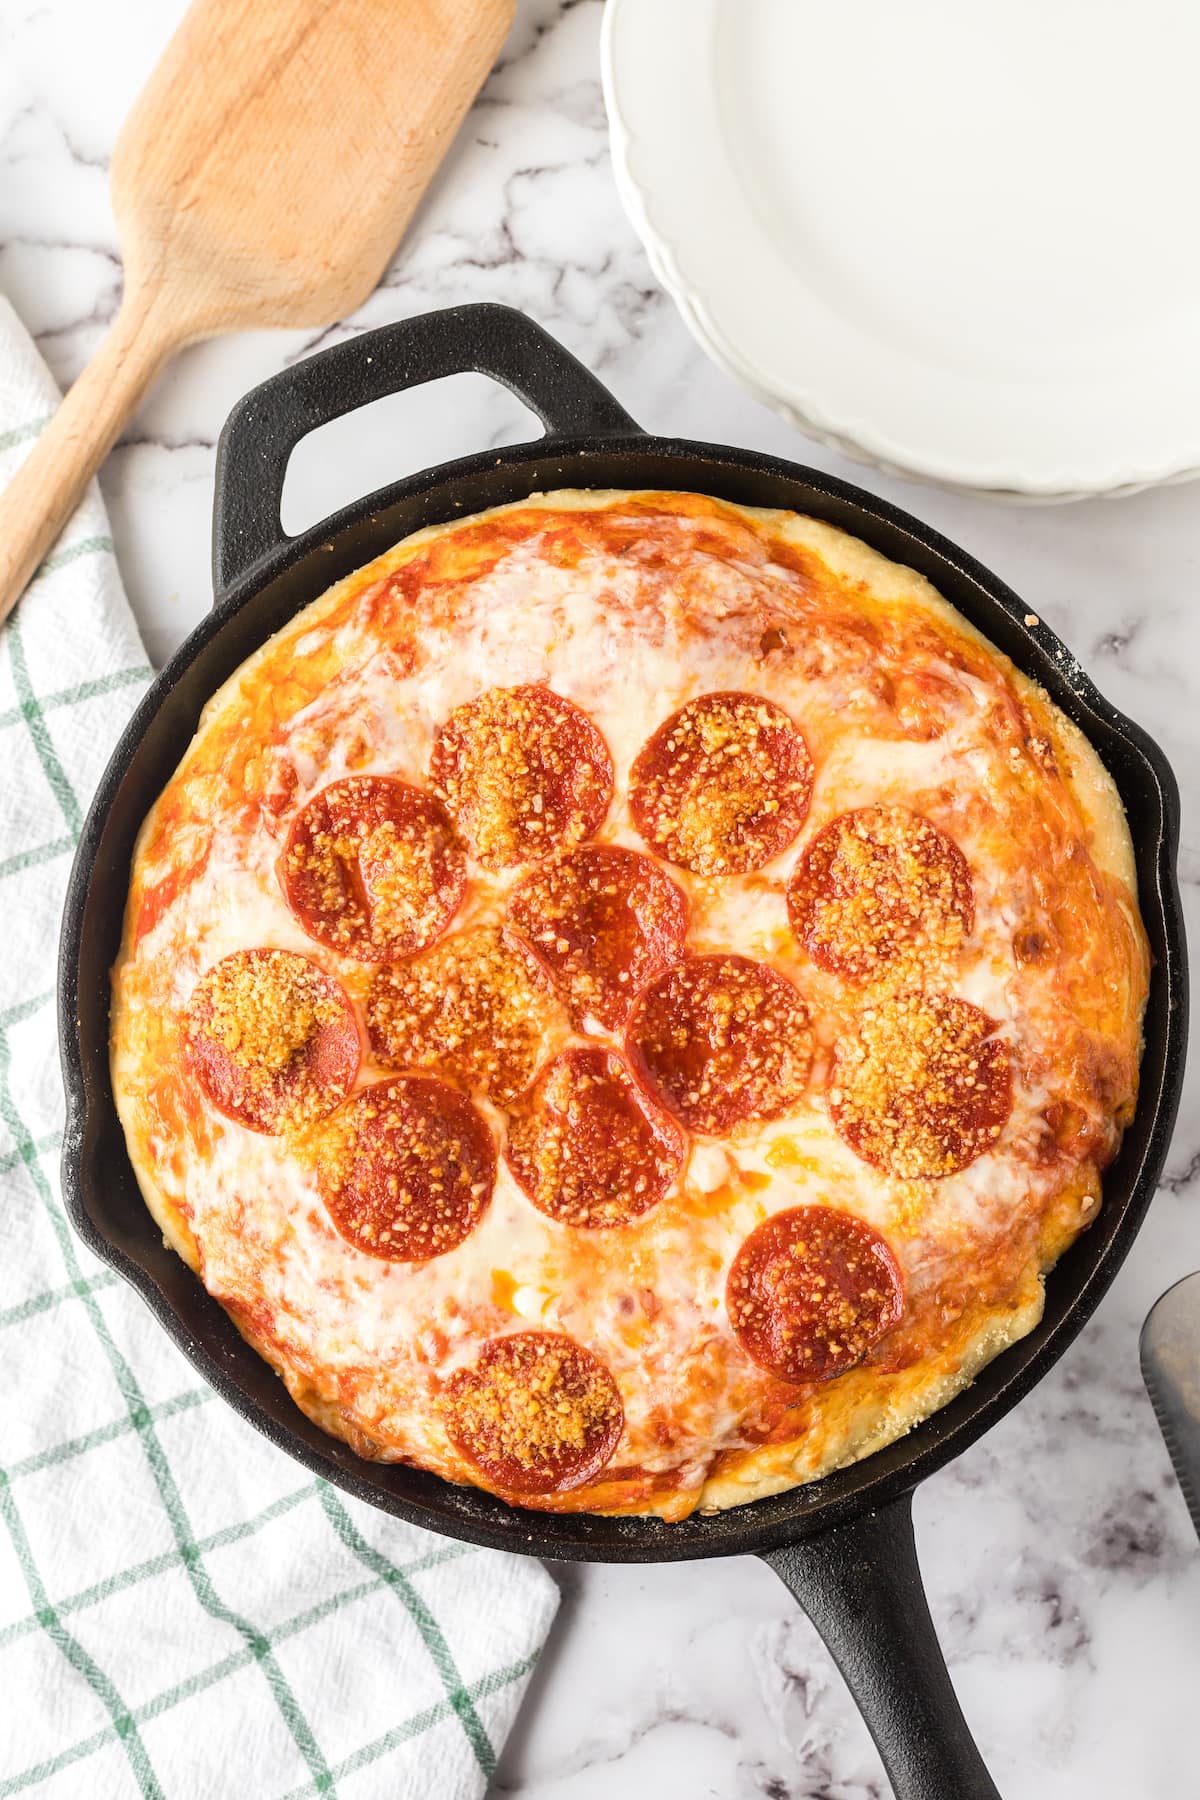 baked deep dish pizza in a cast iron skillet on a table